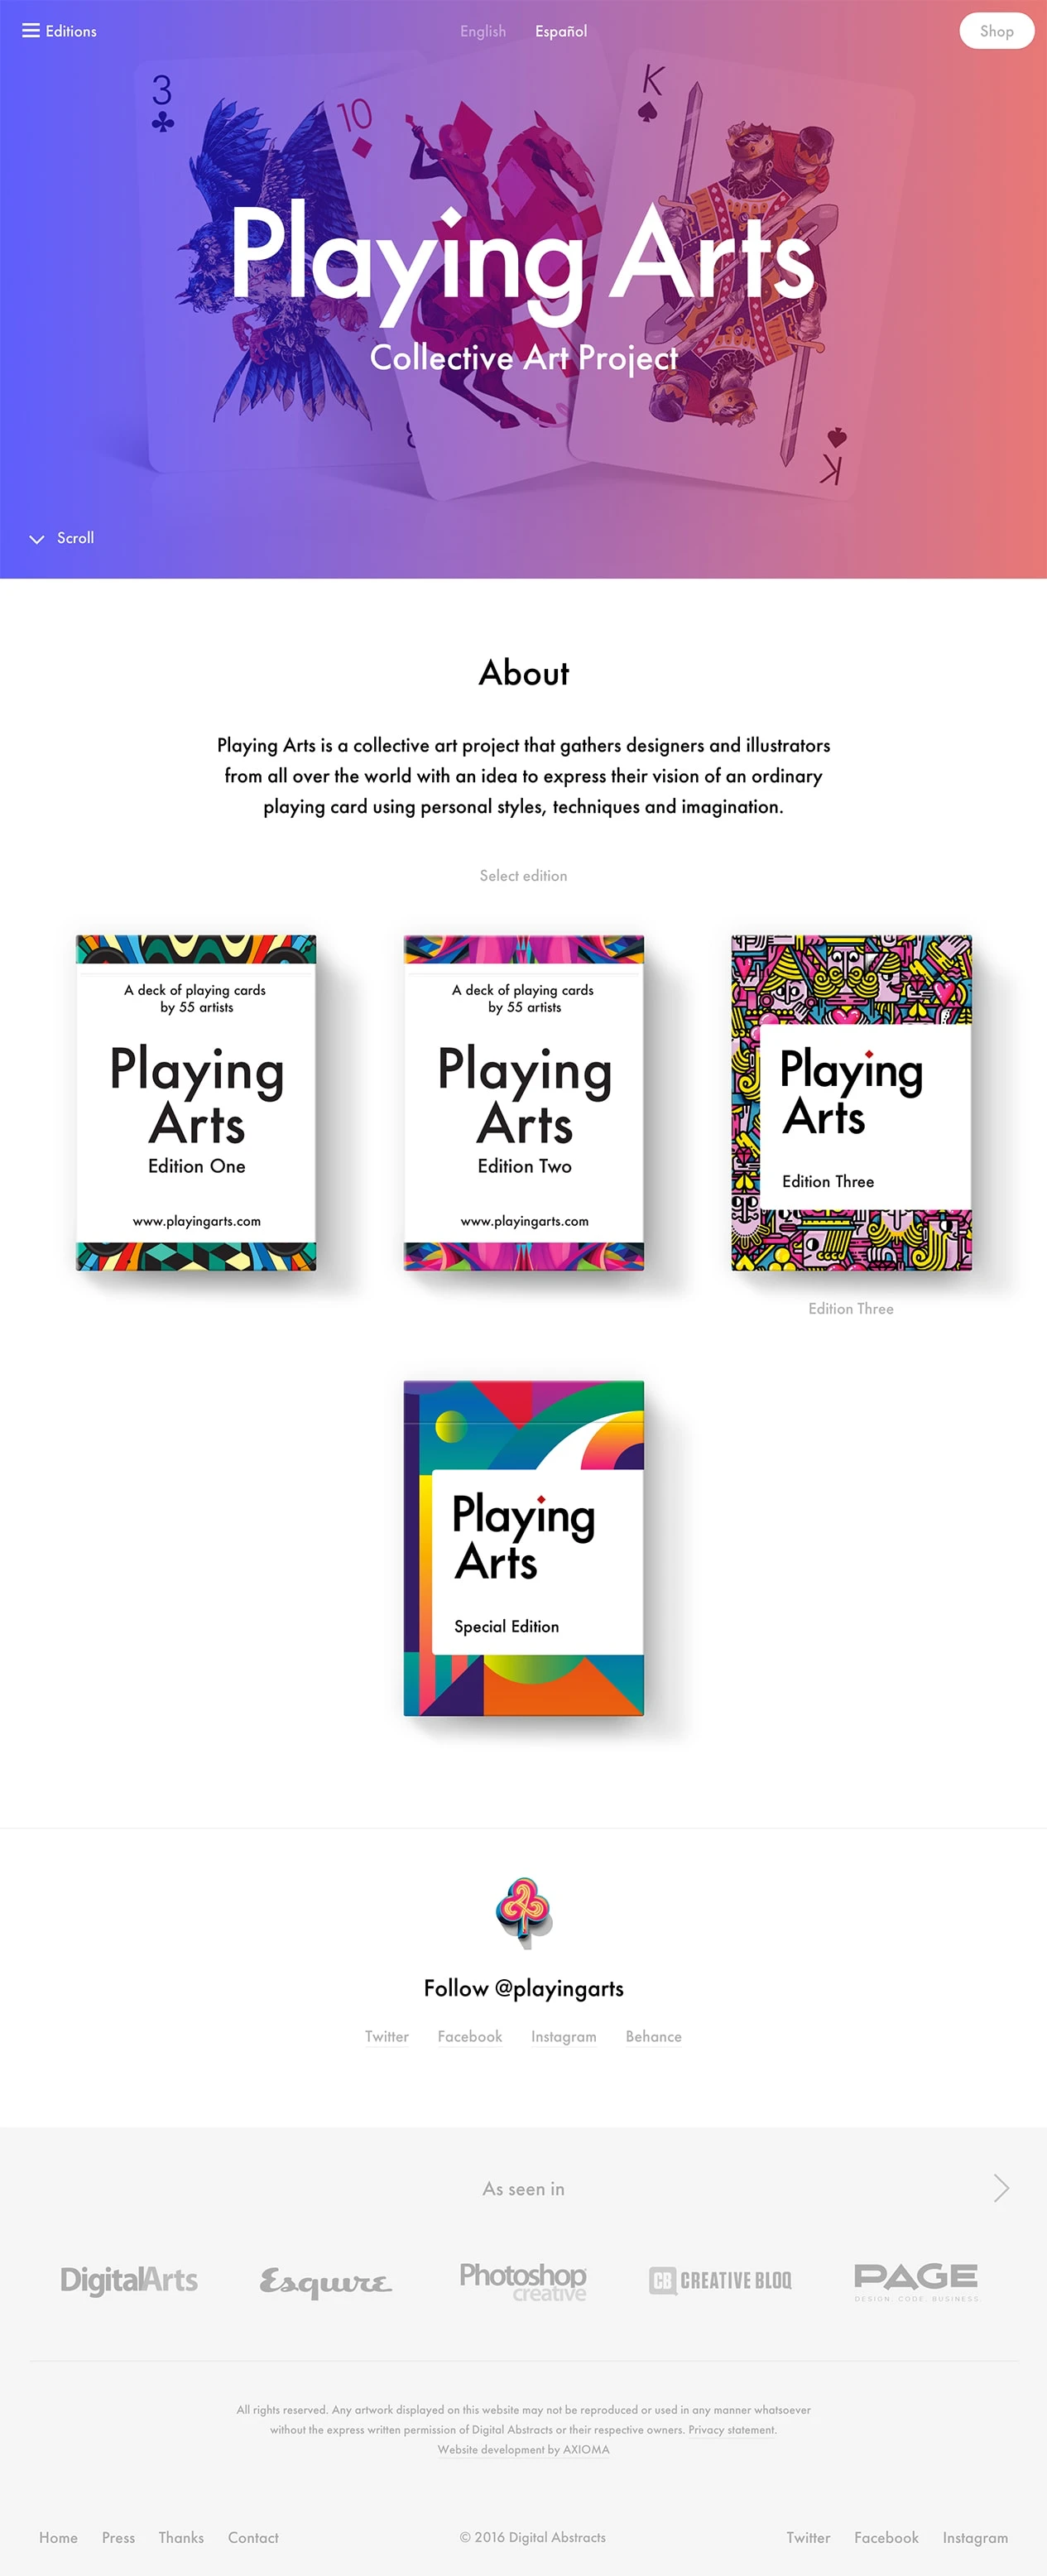 Playing Arts Landing Page Example: Playing Arts is a collaborative art project that gathers the best designers and illustrators from all over the world with an idea to express their vision of an ordinary playing card using personal styles, techniques and imagination.